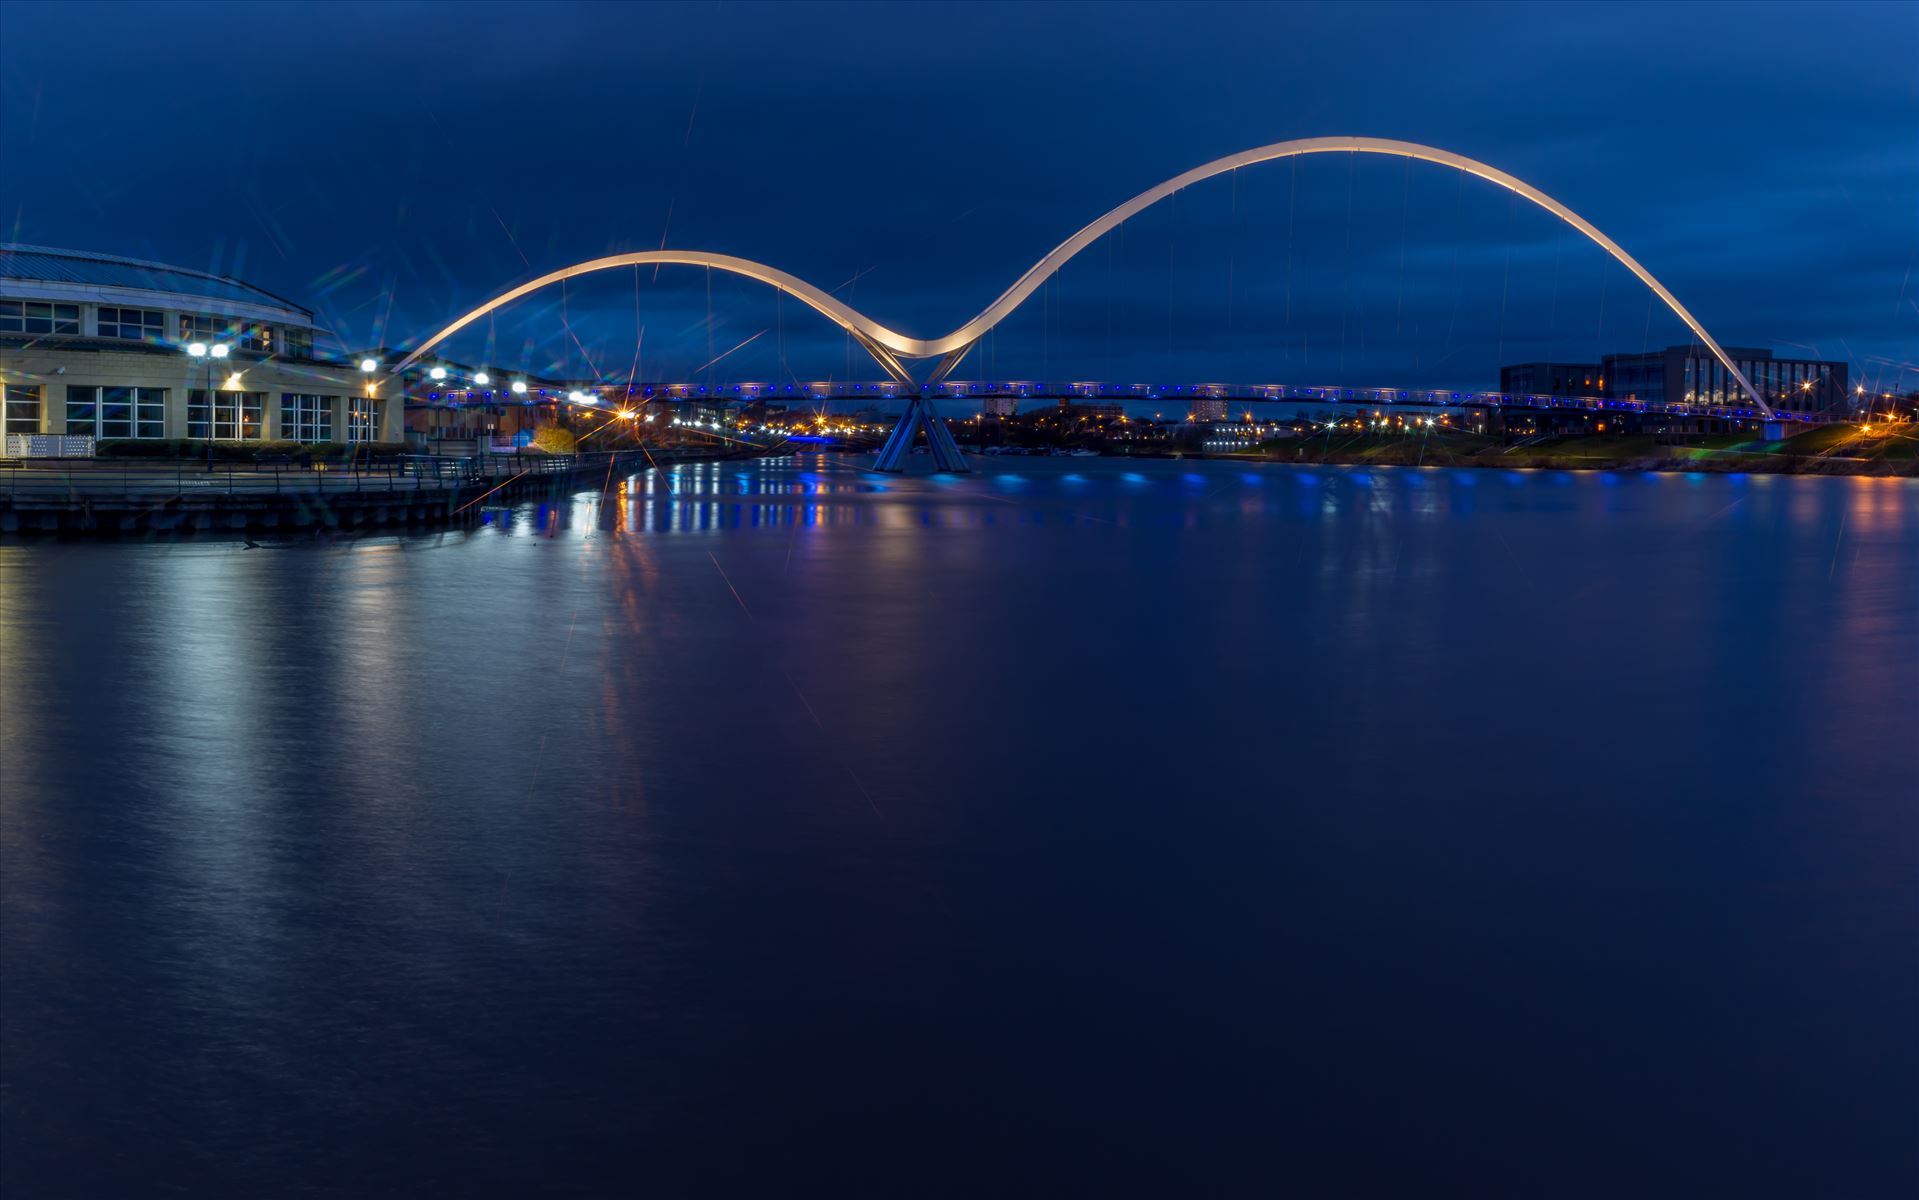 The Infinity Bridge 15 - The Infinity Bridge is a public pedestrian and cycle footbridge across the River Tees that was officially opened on 14 May 2009 at a cost of £15 million. by philreay